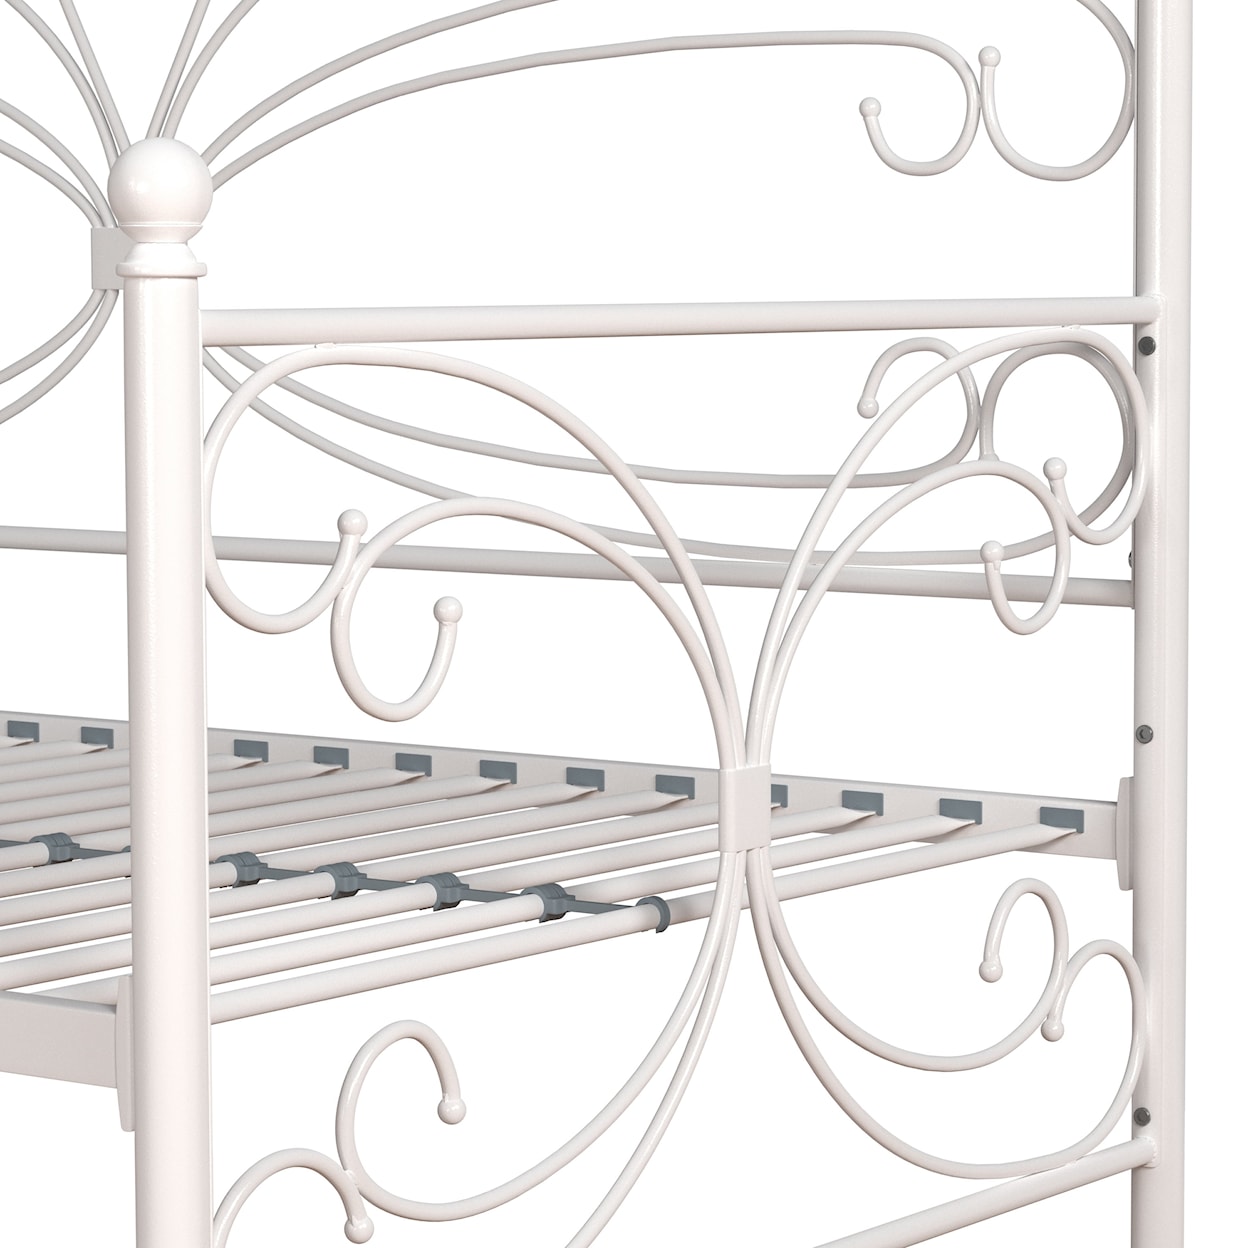 Hillsdale Anslee Daybed